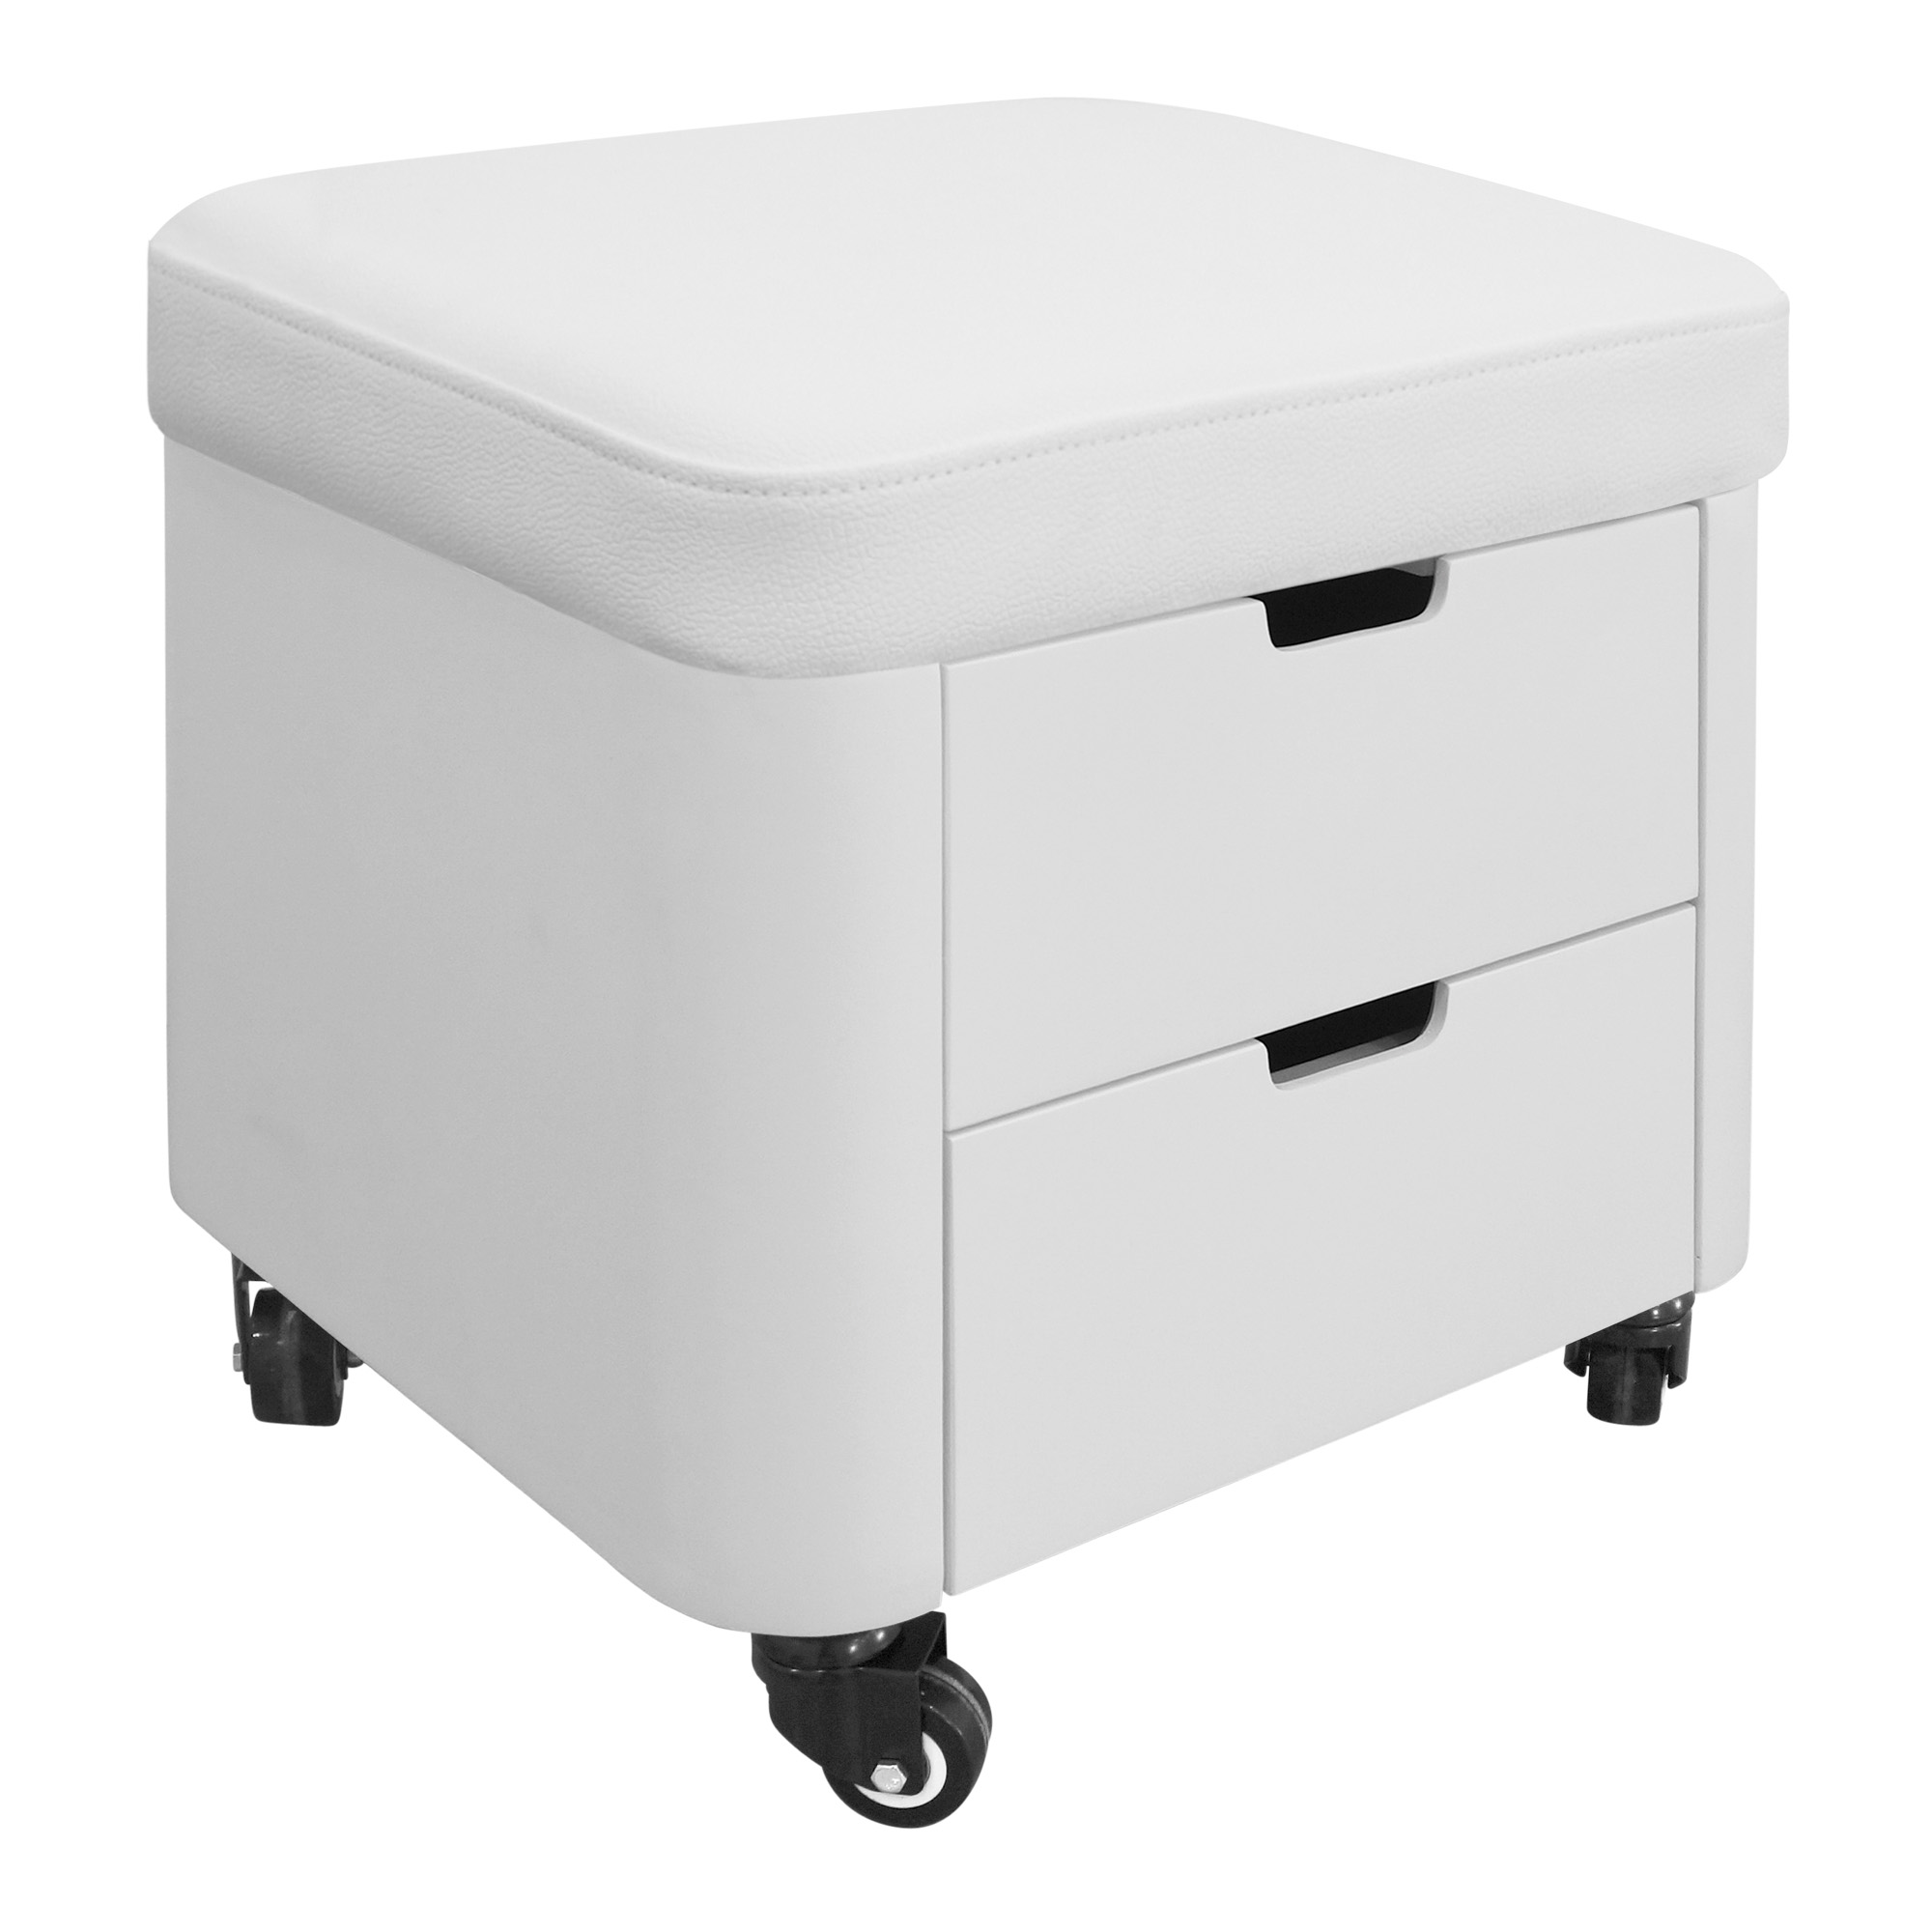 Galaxy multi-purpose stool for pedicure and manicure with two drawers